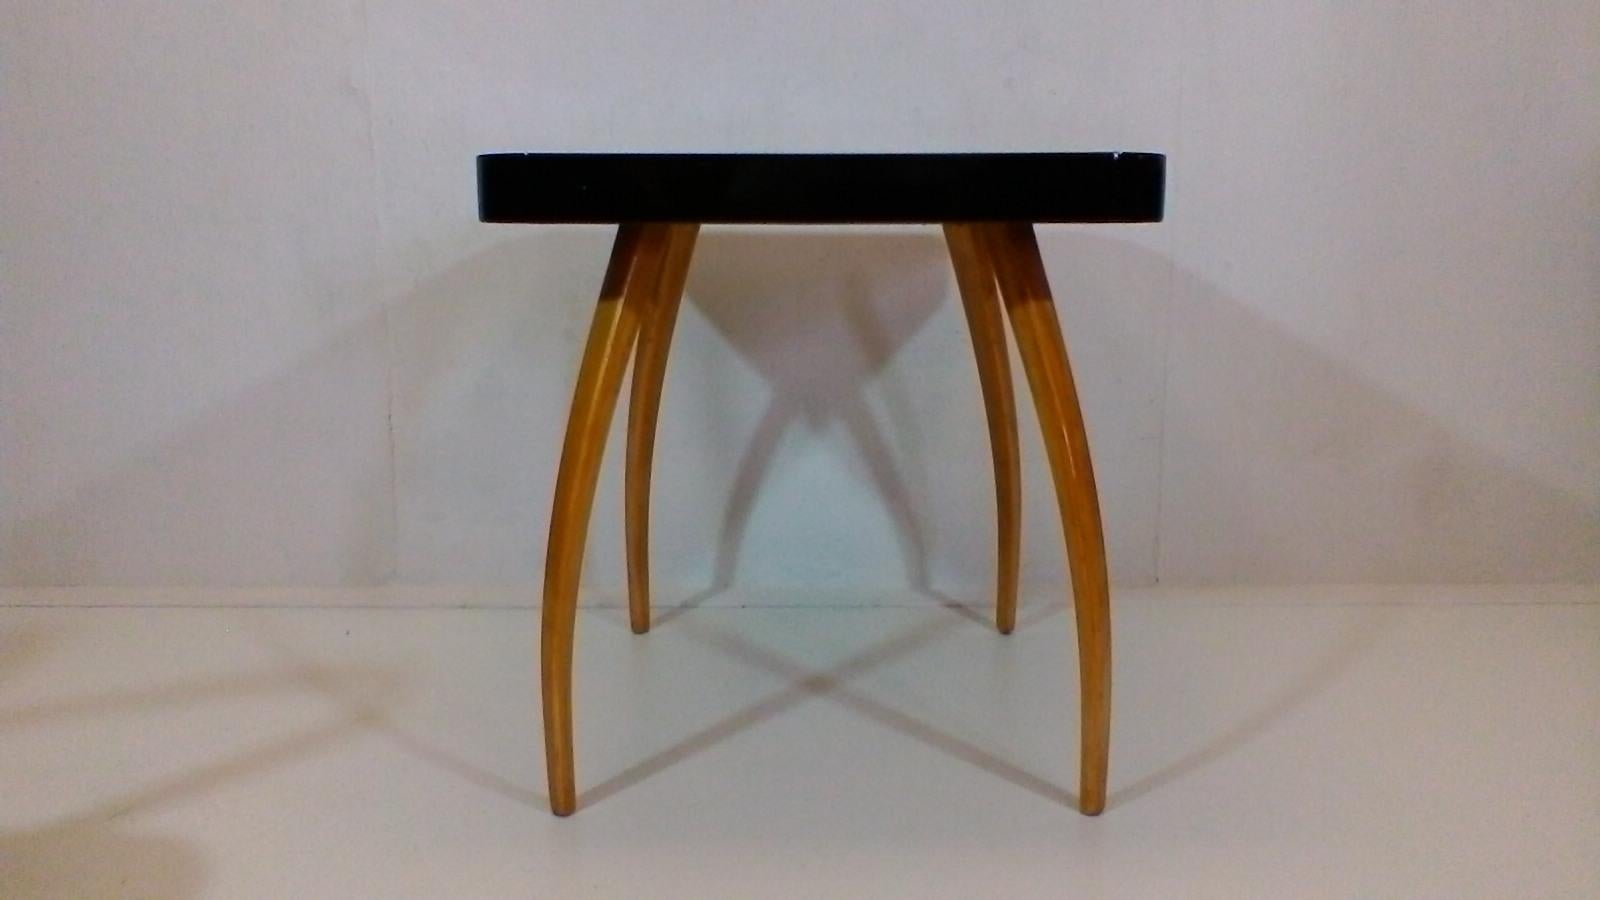 Made in Czechoslovakia. Wooden construction, legs is made of light beechwood and varnished polyurethan varnish. Upper surface is varnished black quality polyurethan varnish. The item is after complete renovation.